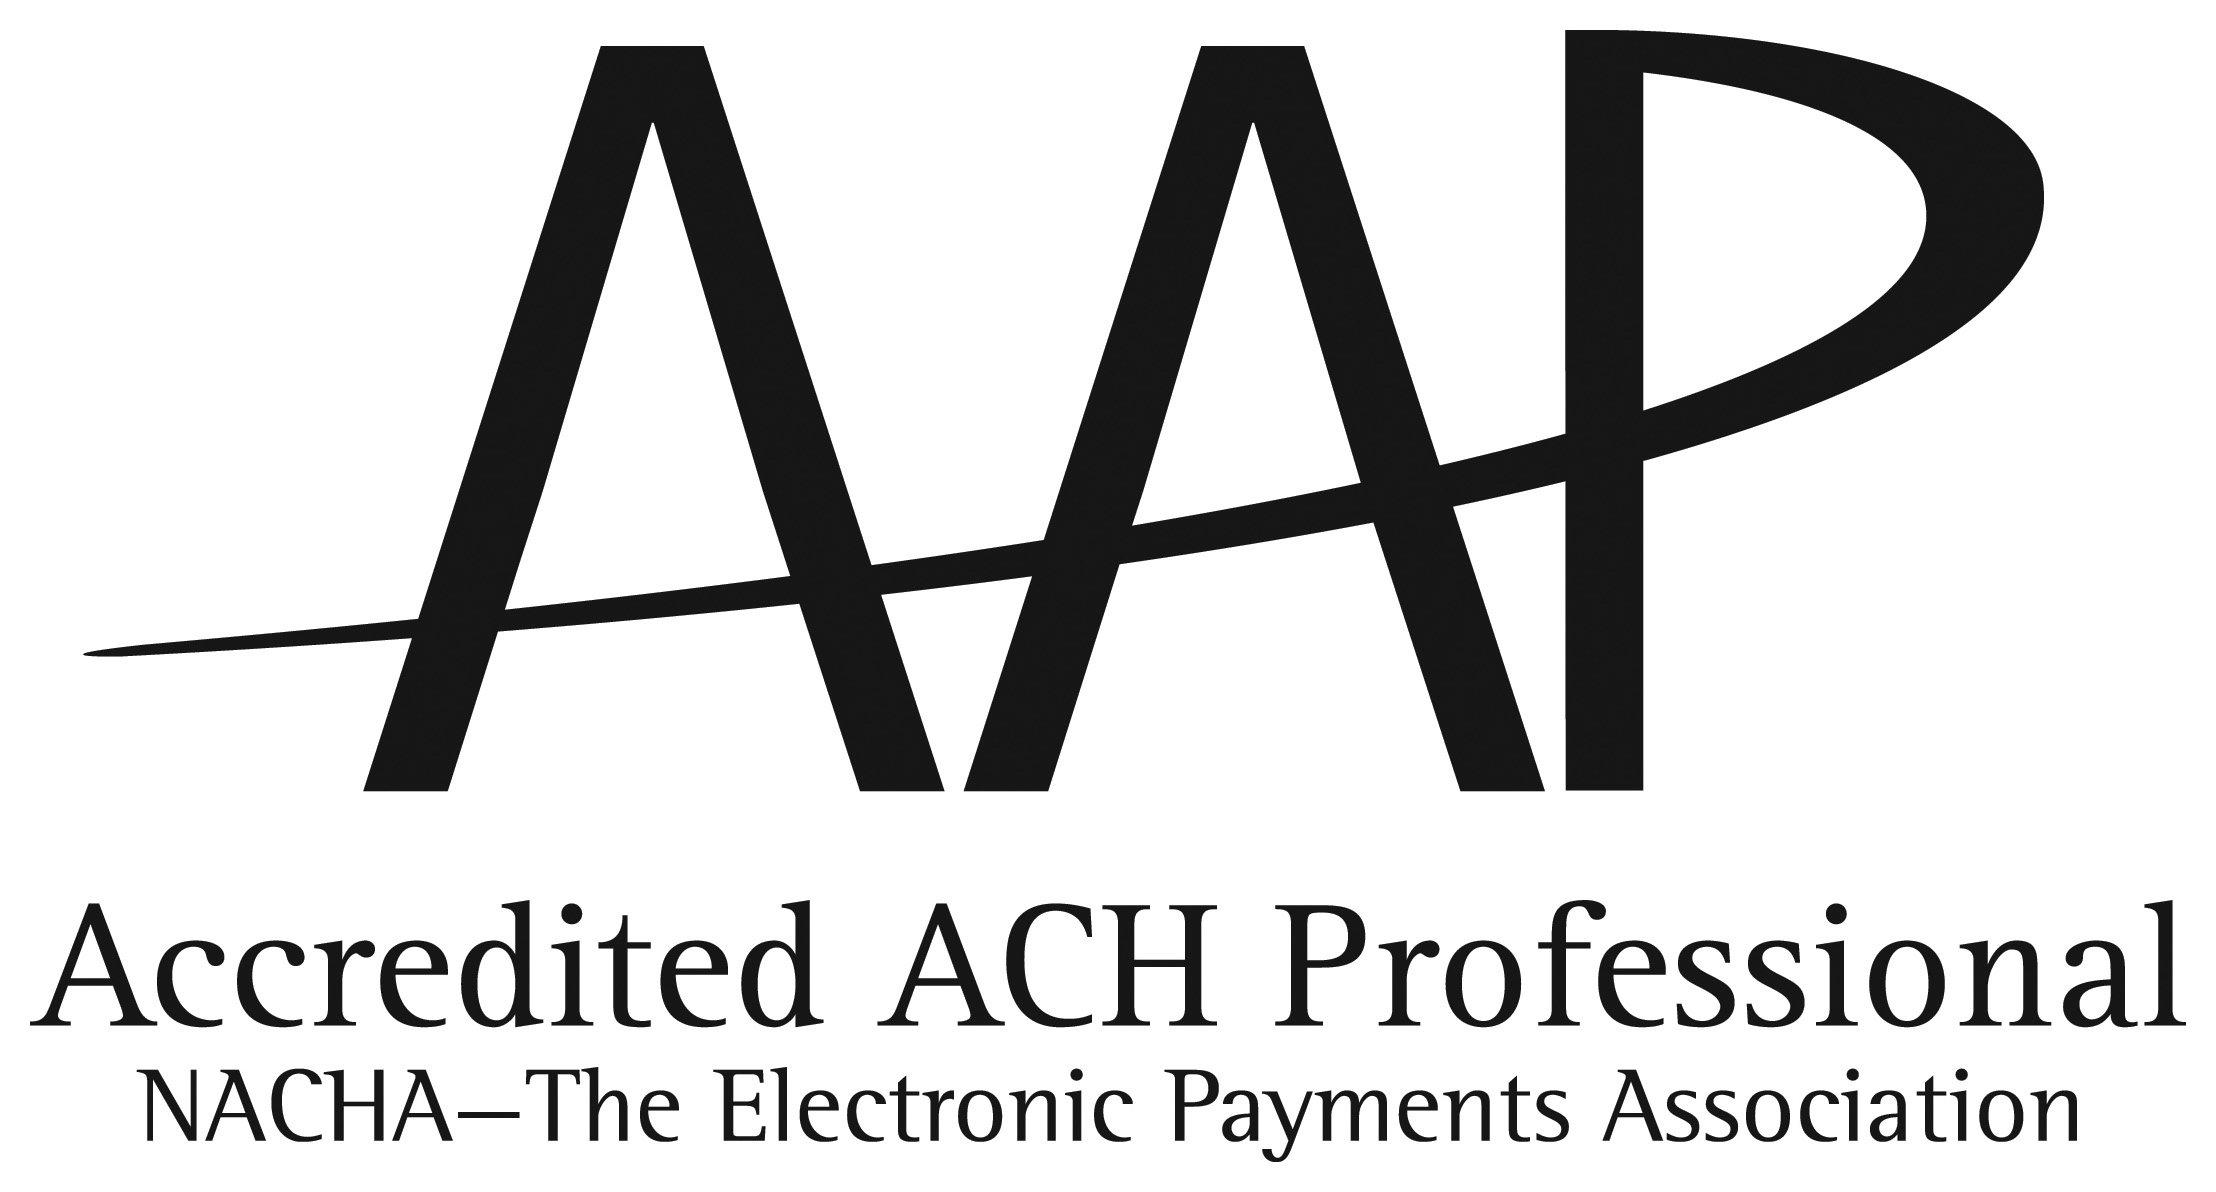 Trademark Logo AAP ACCREDITED ACH PROFESSIONAL NACHA - THE ELECTRONIC PAYMENTS ASSOCIATION